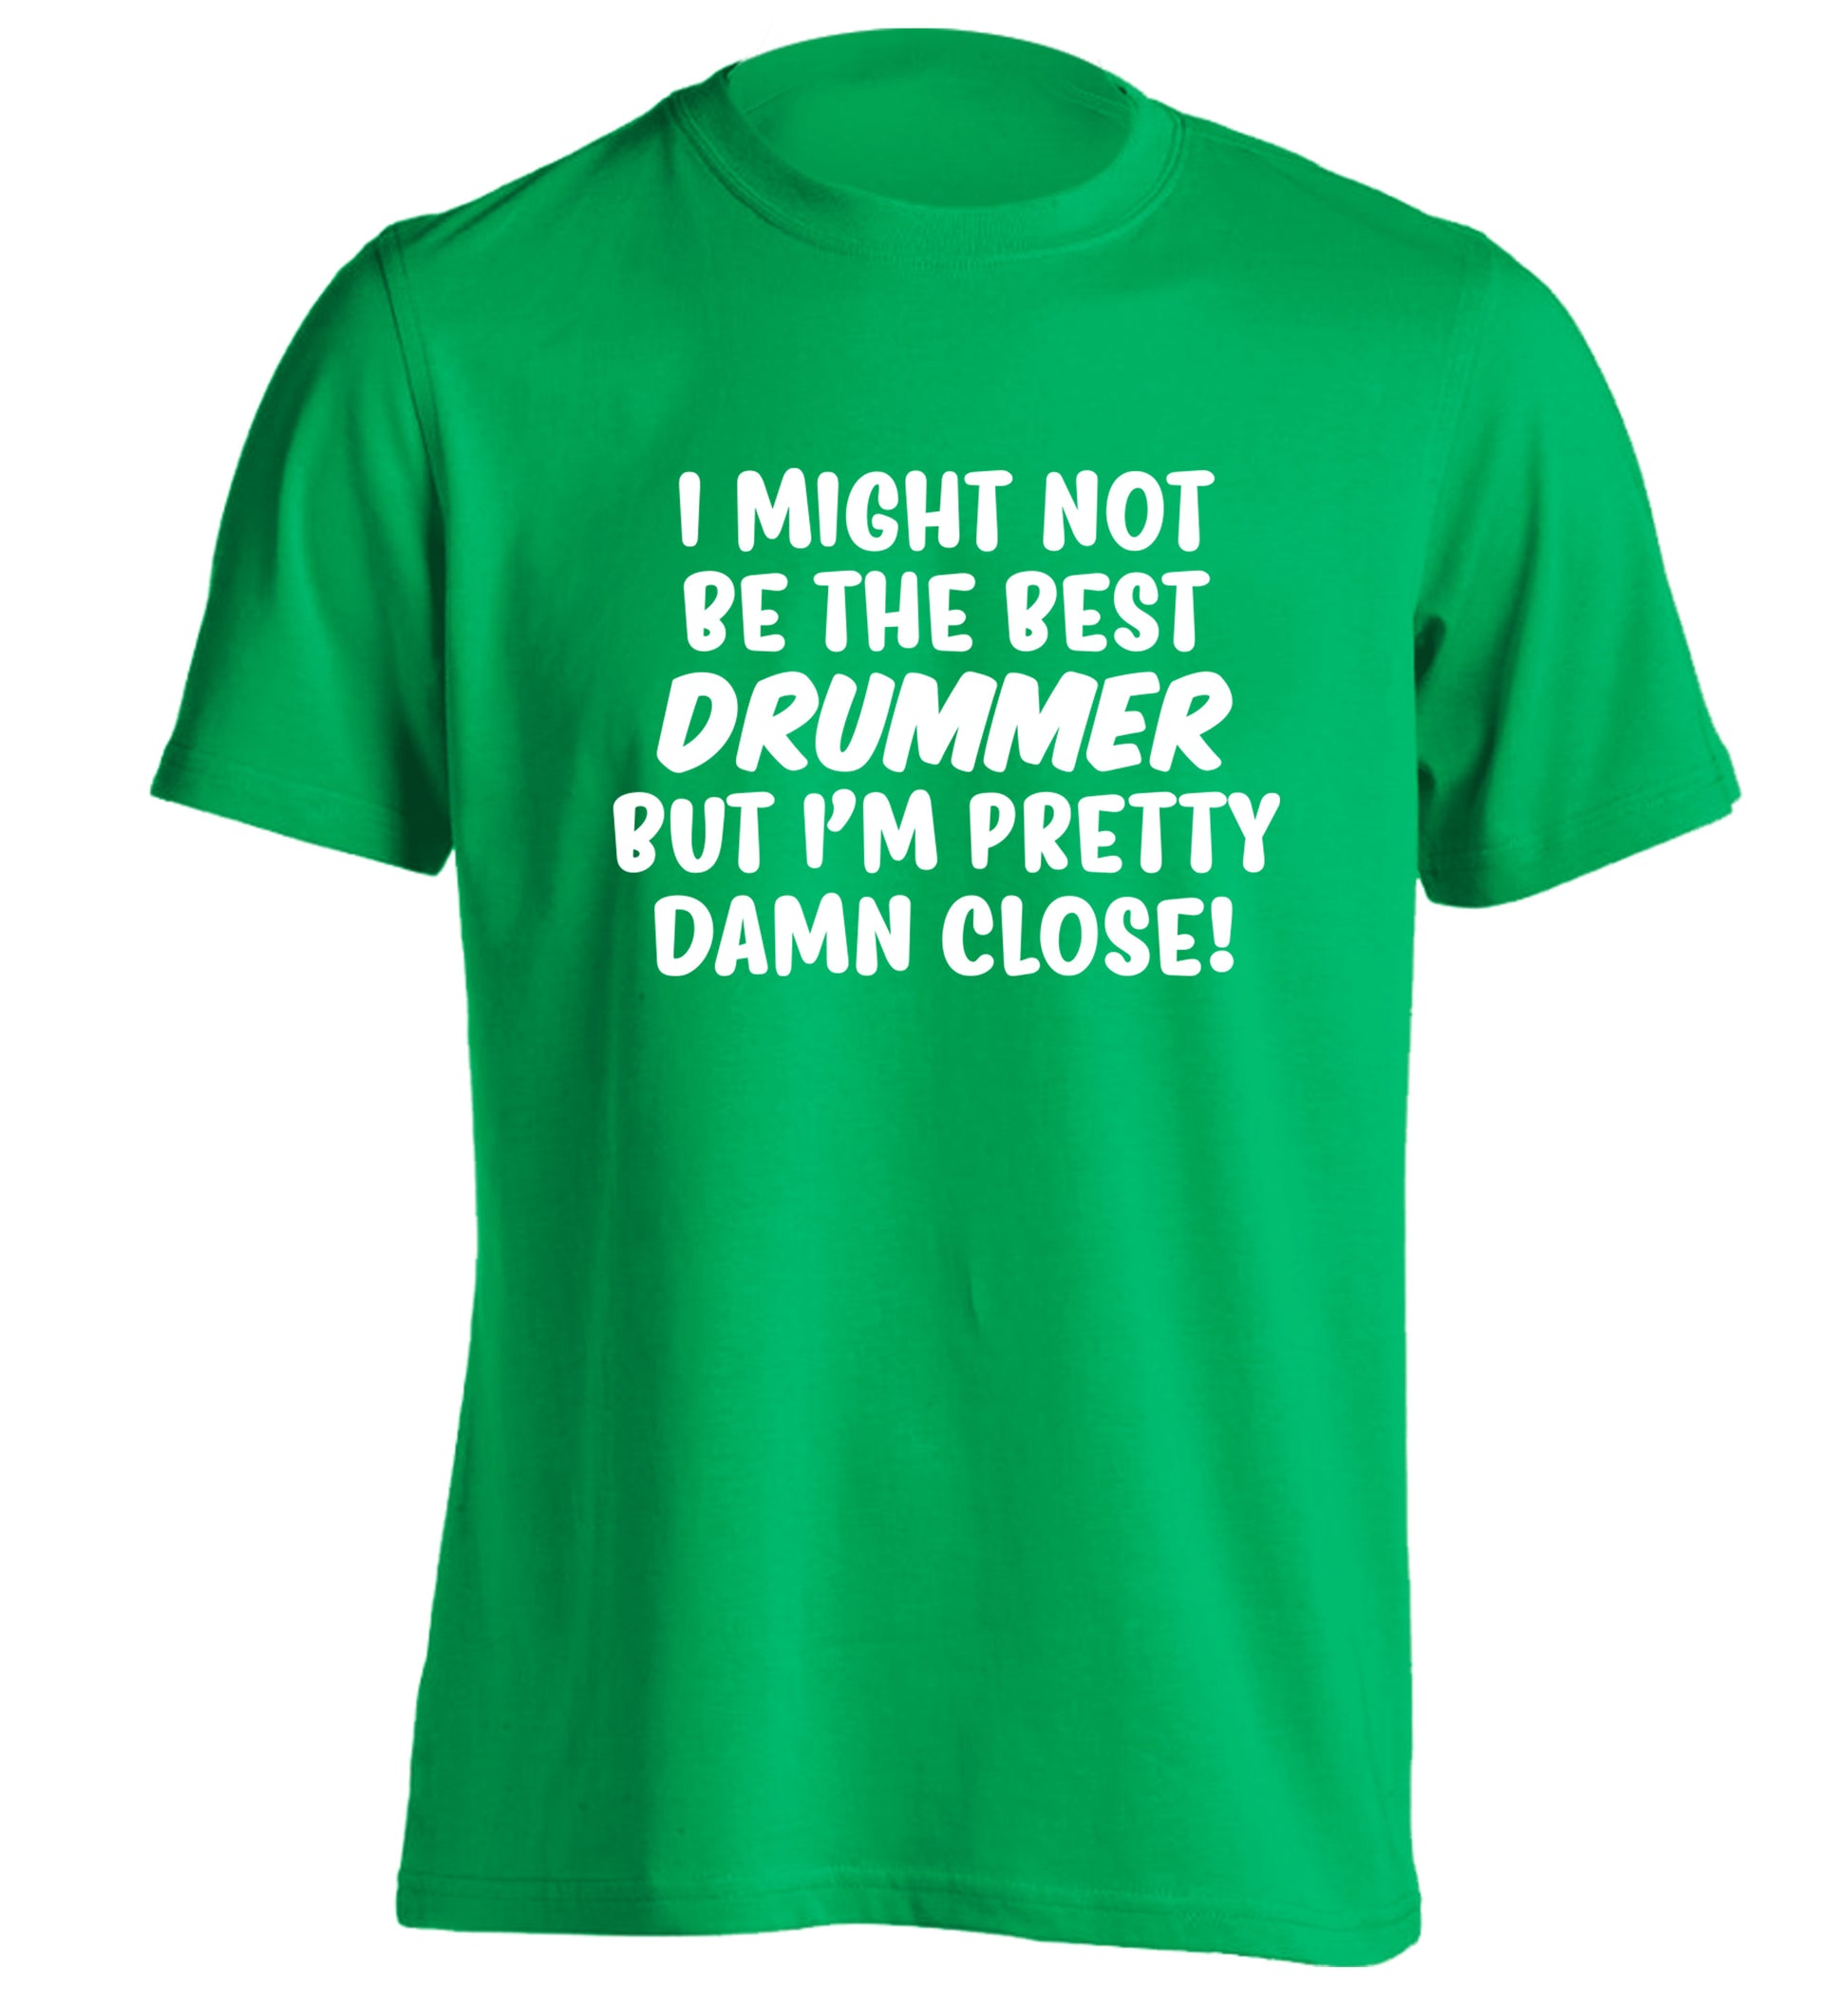 I might not be the best drummer but I'm pretty close! adults unisexgreen Tshirt 2XL